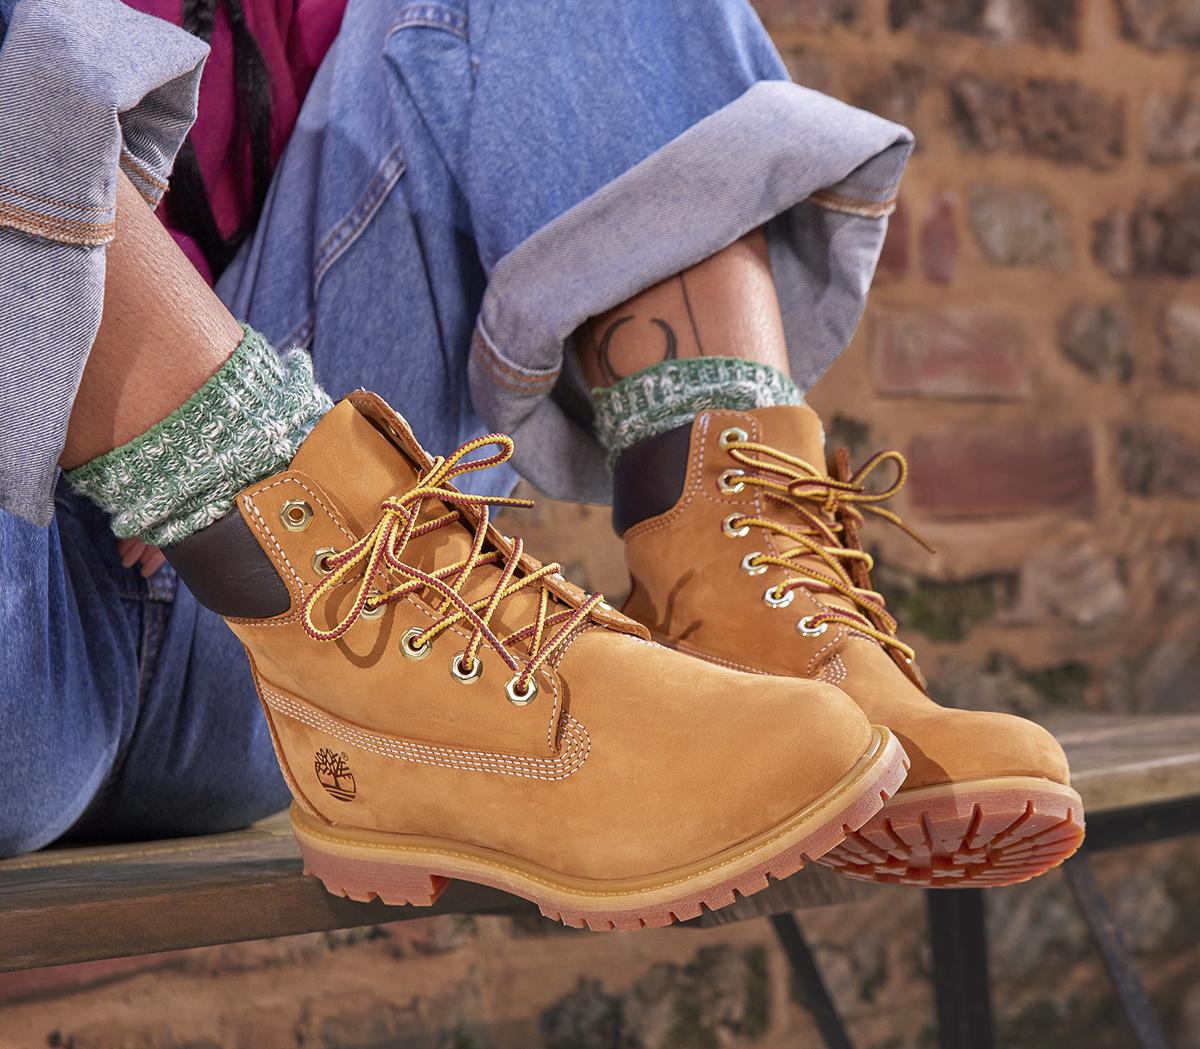 Dato Río Paraná cocina Timberland Premium 6 Boots F Wheat Nubuck - Women's Ankle Boots